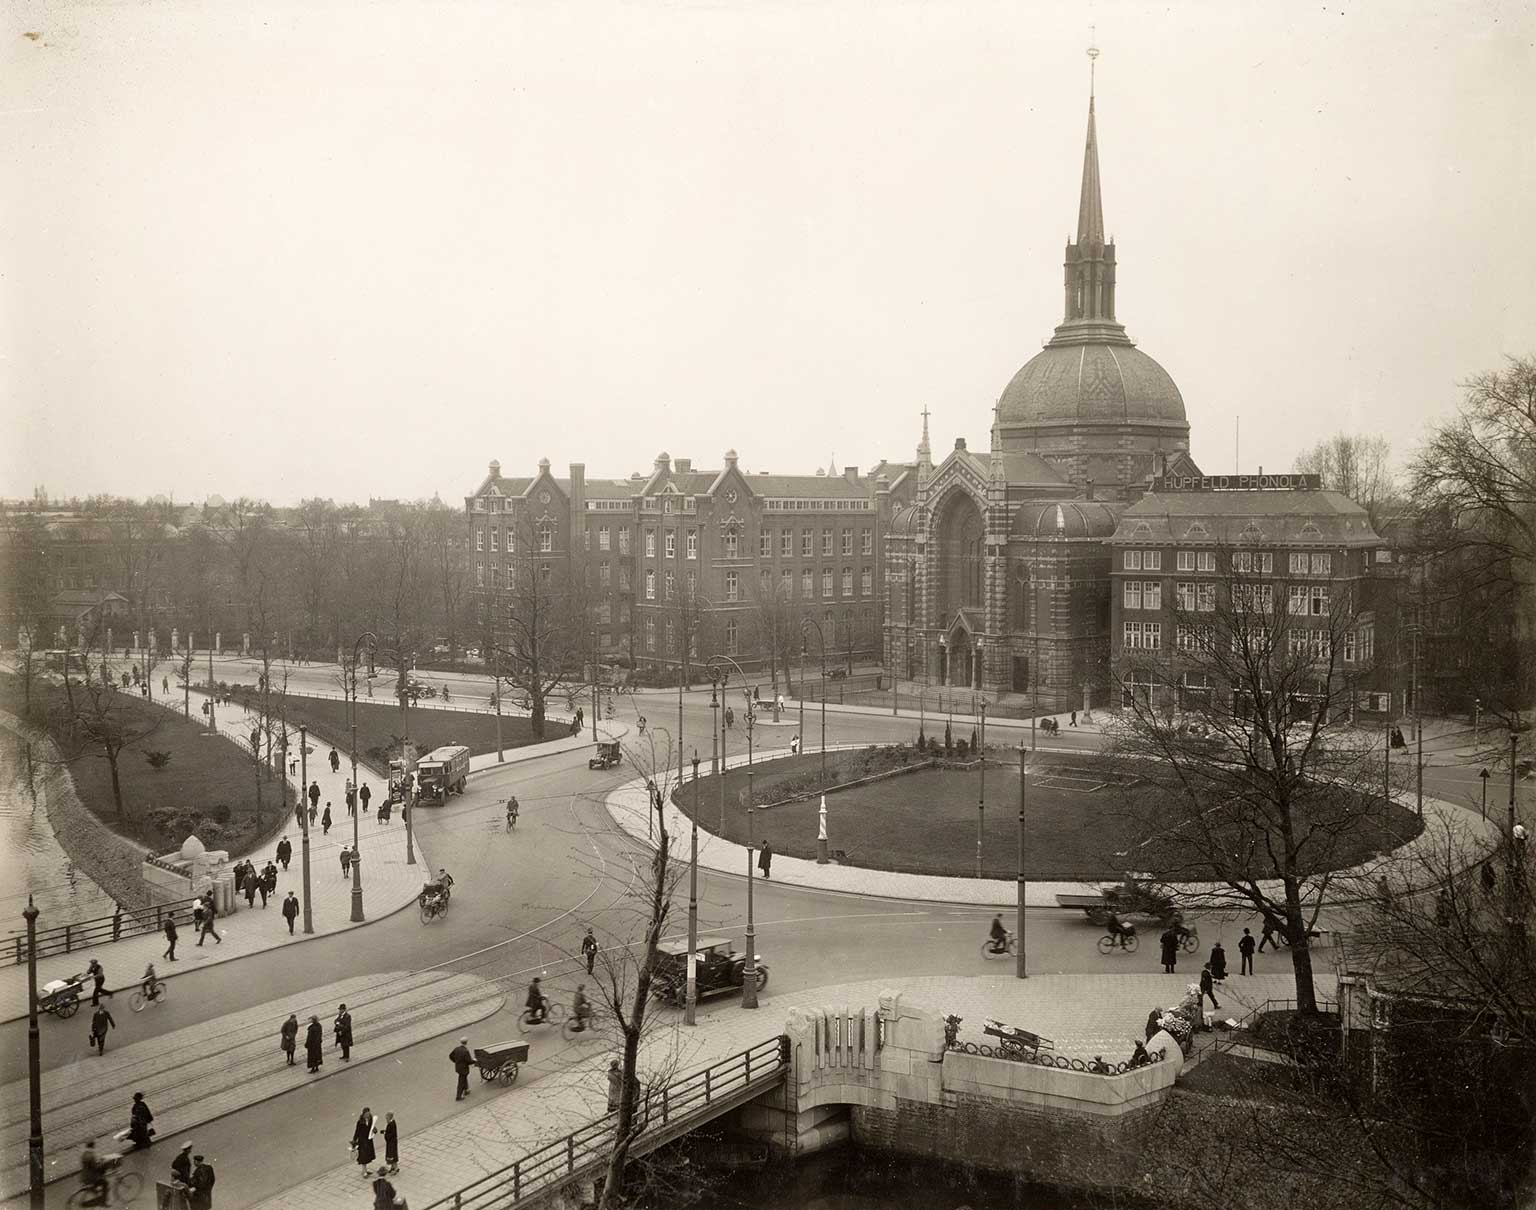 Roundabout at Leidsebosje, Amsterdam, in 1926, seen from the American Hotel 